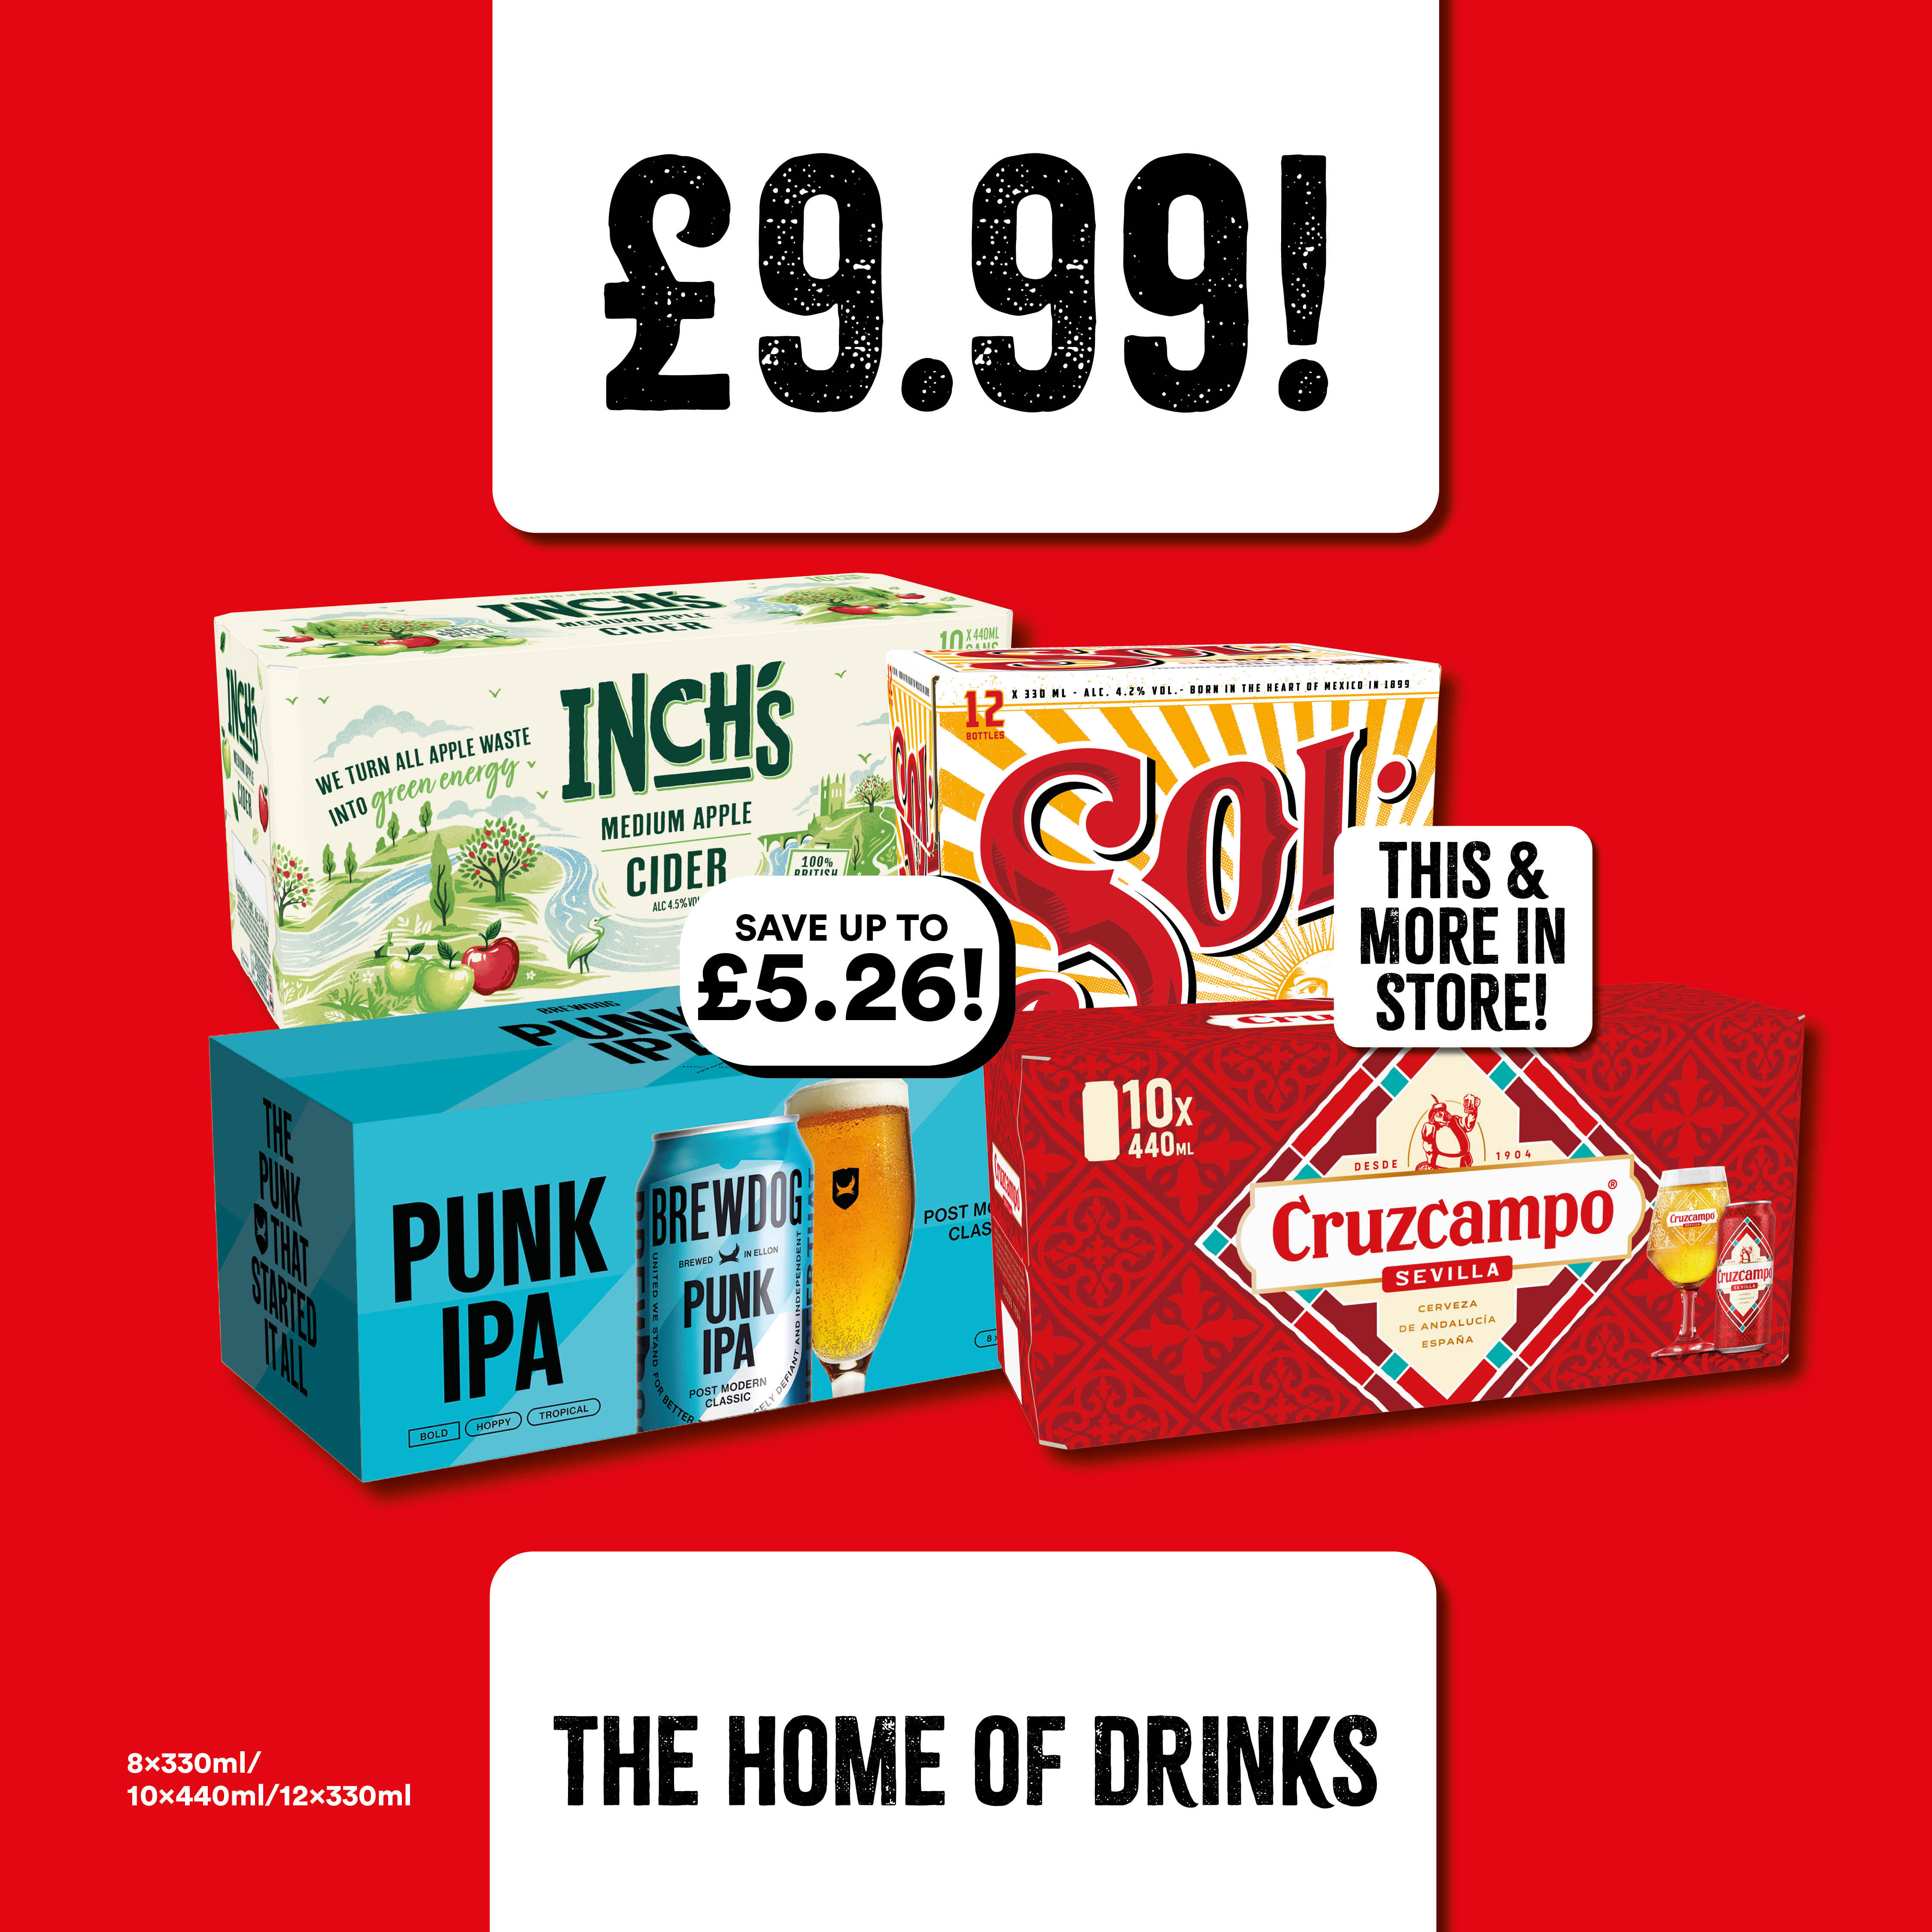 £9.99 on selected Beer and Lager packs Bargain Booze Newport Pagnell 01908 612653